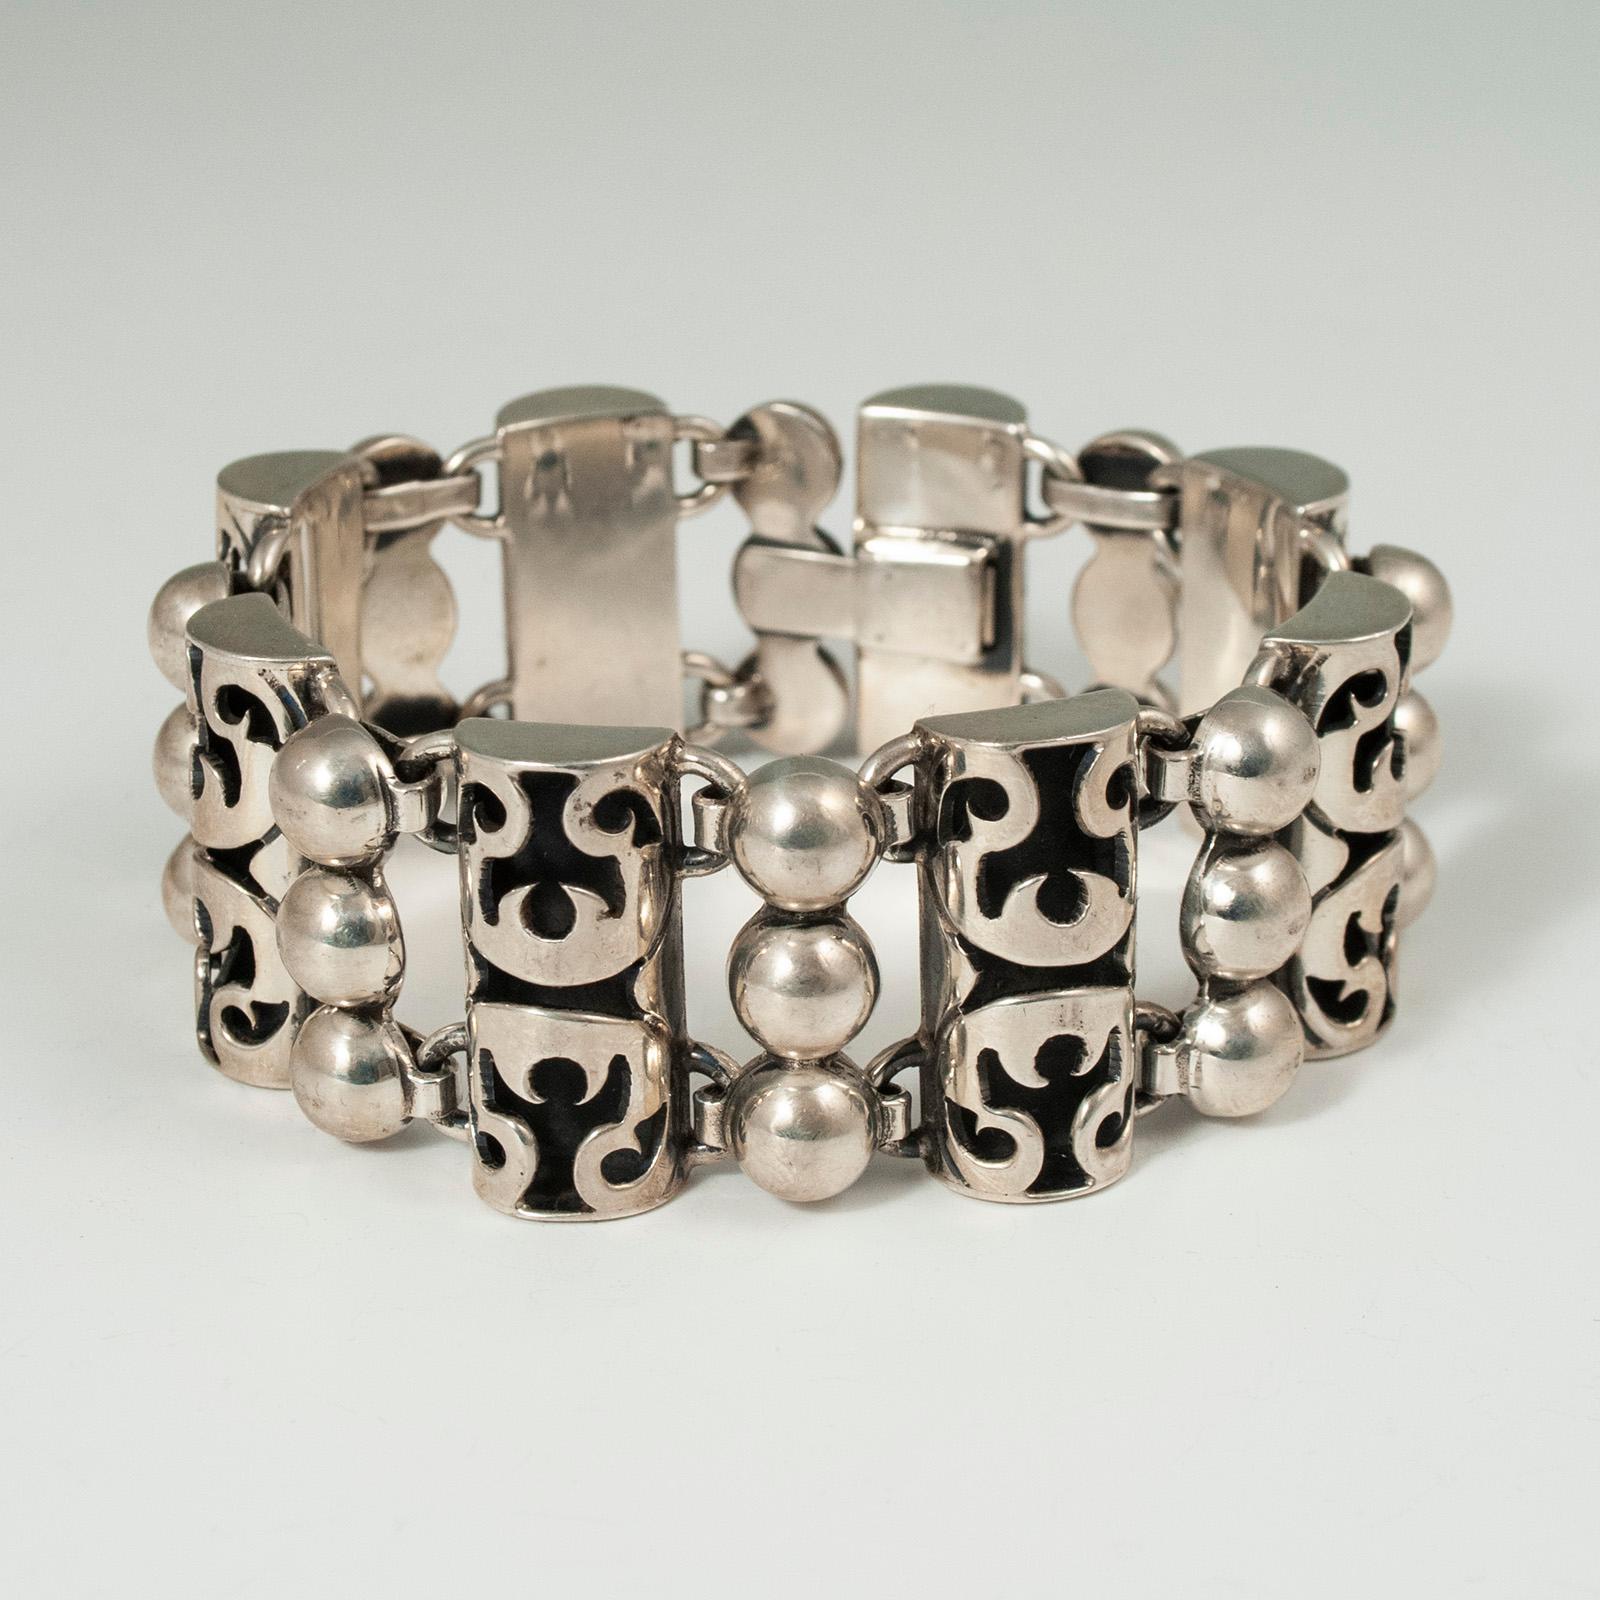 Mid-20th century silver *Angel* bracelet, Taxco, Mexico

Plateria Cony was a store opened in 1958 in Taxco by the daughter and son-in-law of Ana Maria Nunez de Brilanti, a well known designer and producer (Plateria Victoria) of jewelry and